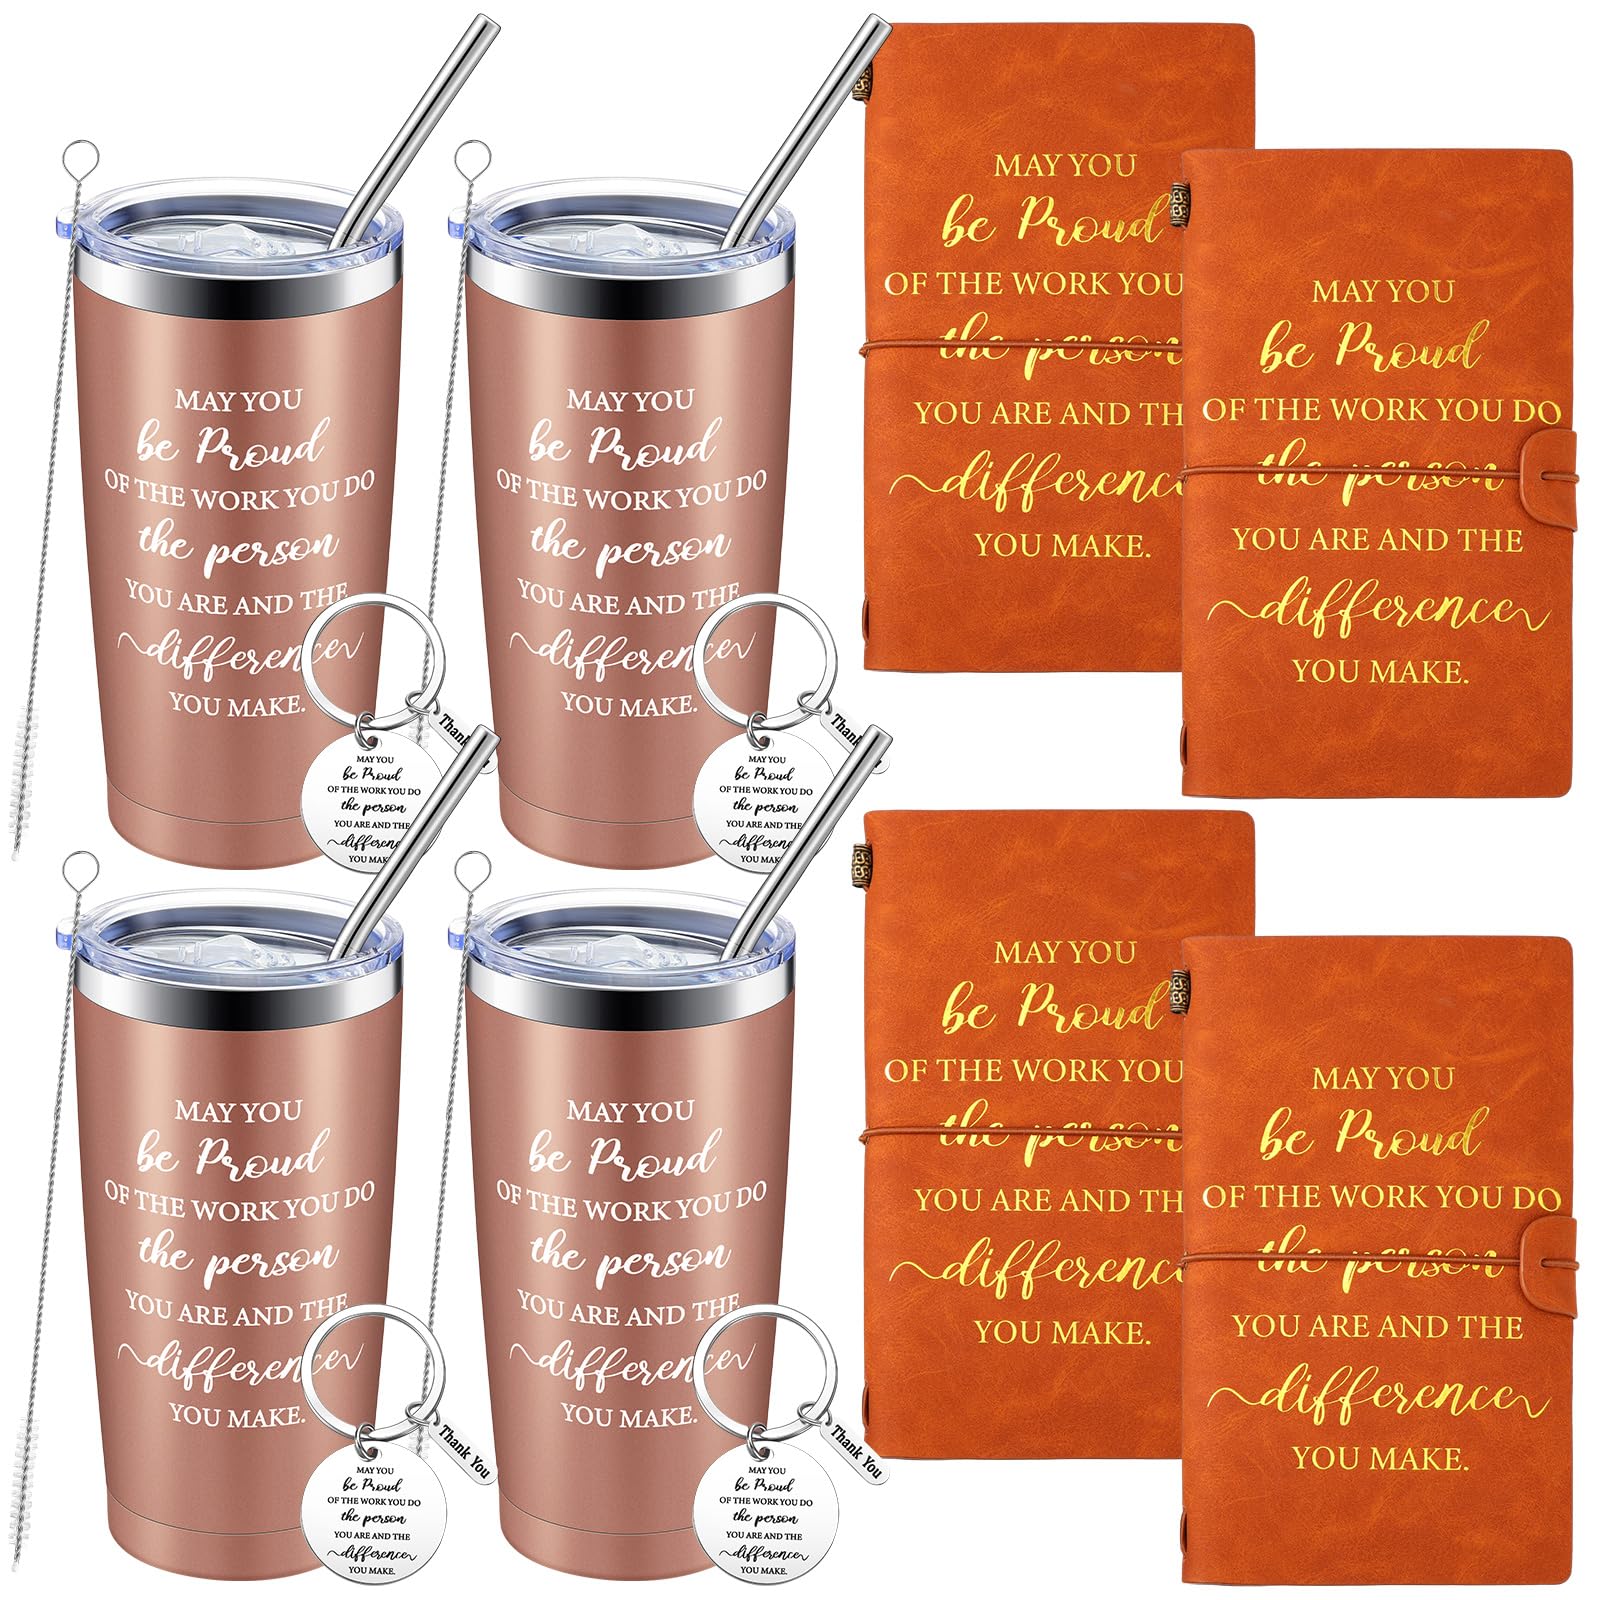 Yaomiao 4 Employee Thank You Gifts Set Includes Stainless Steel Insulated Travel Tumbler 20 oz Leather Journal and May You Proud of Keychain Teacher Appreciation Gift Set Wine Cup (Rose Gold)